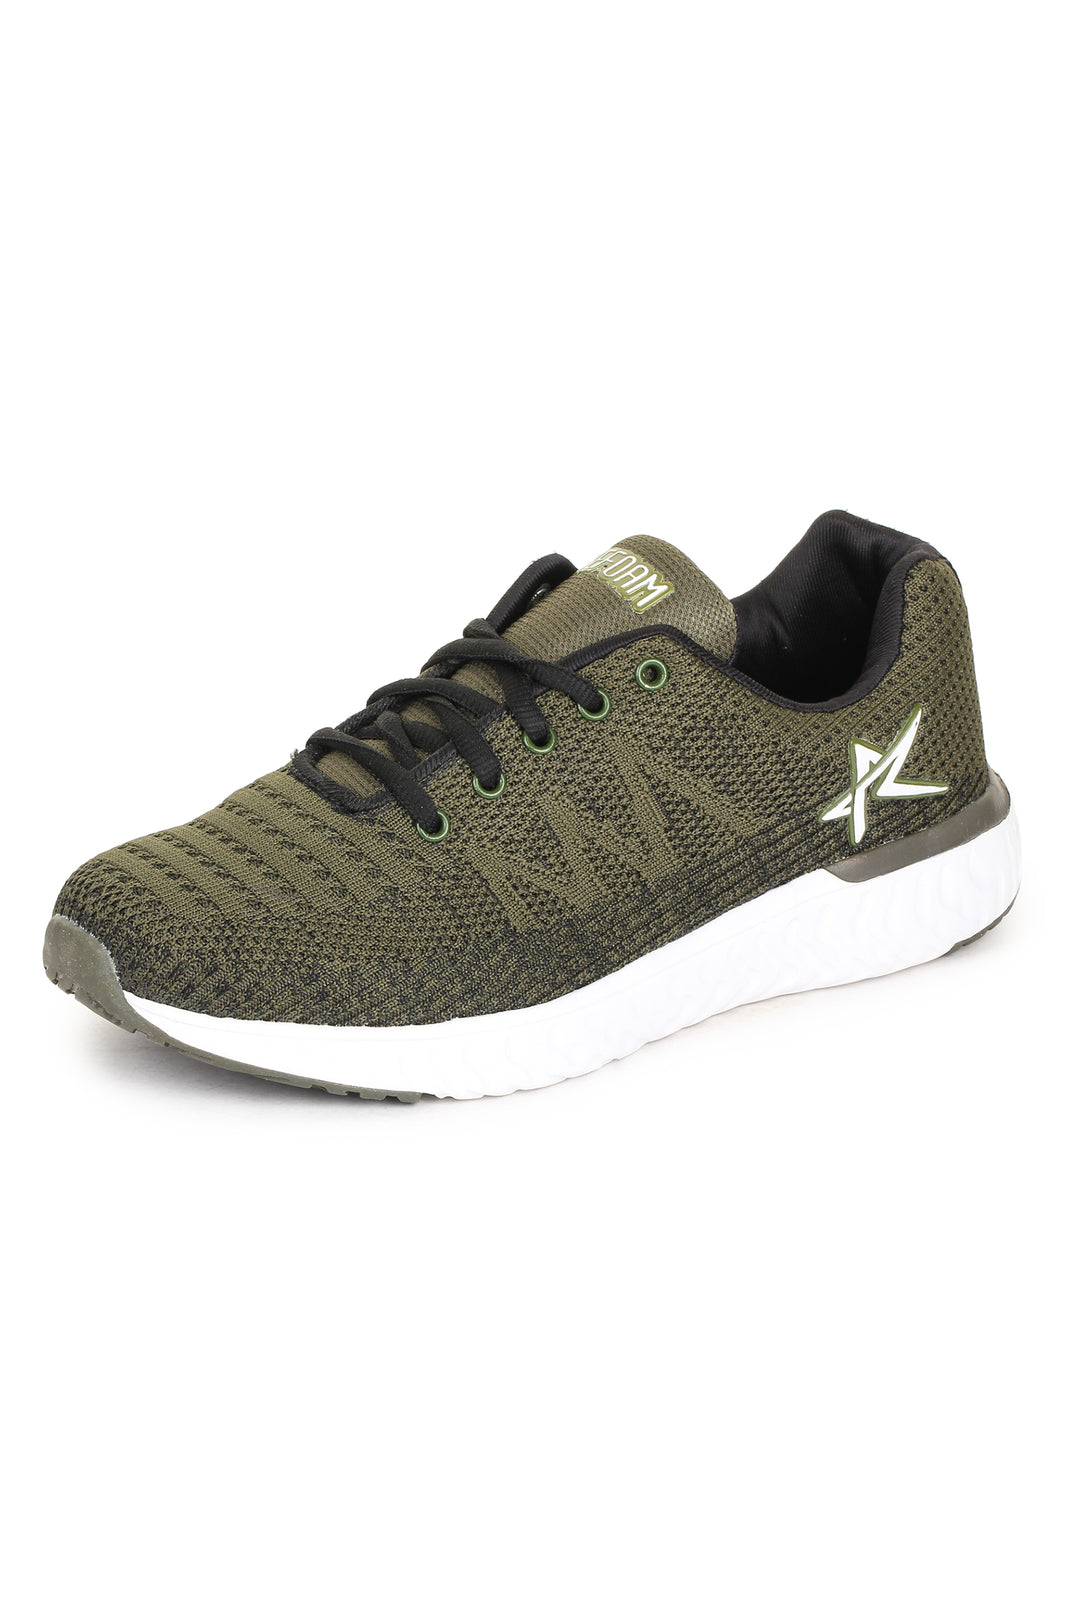 Olive Solid Mesh Lace Up Running Sport Shoes For Men